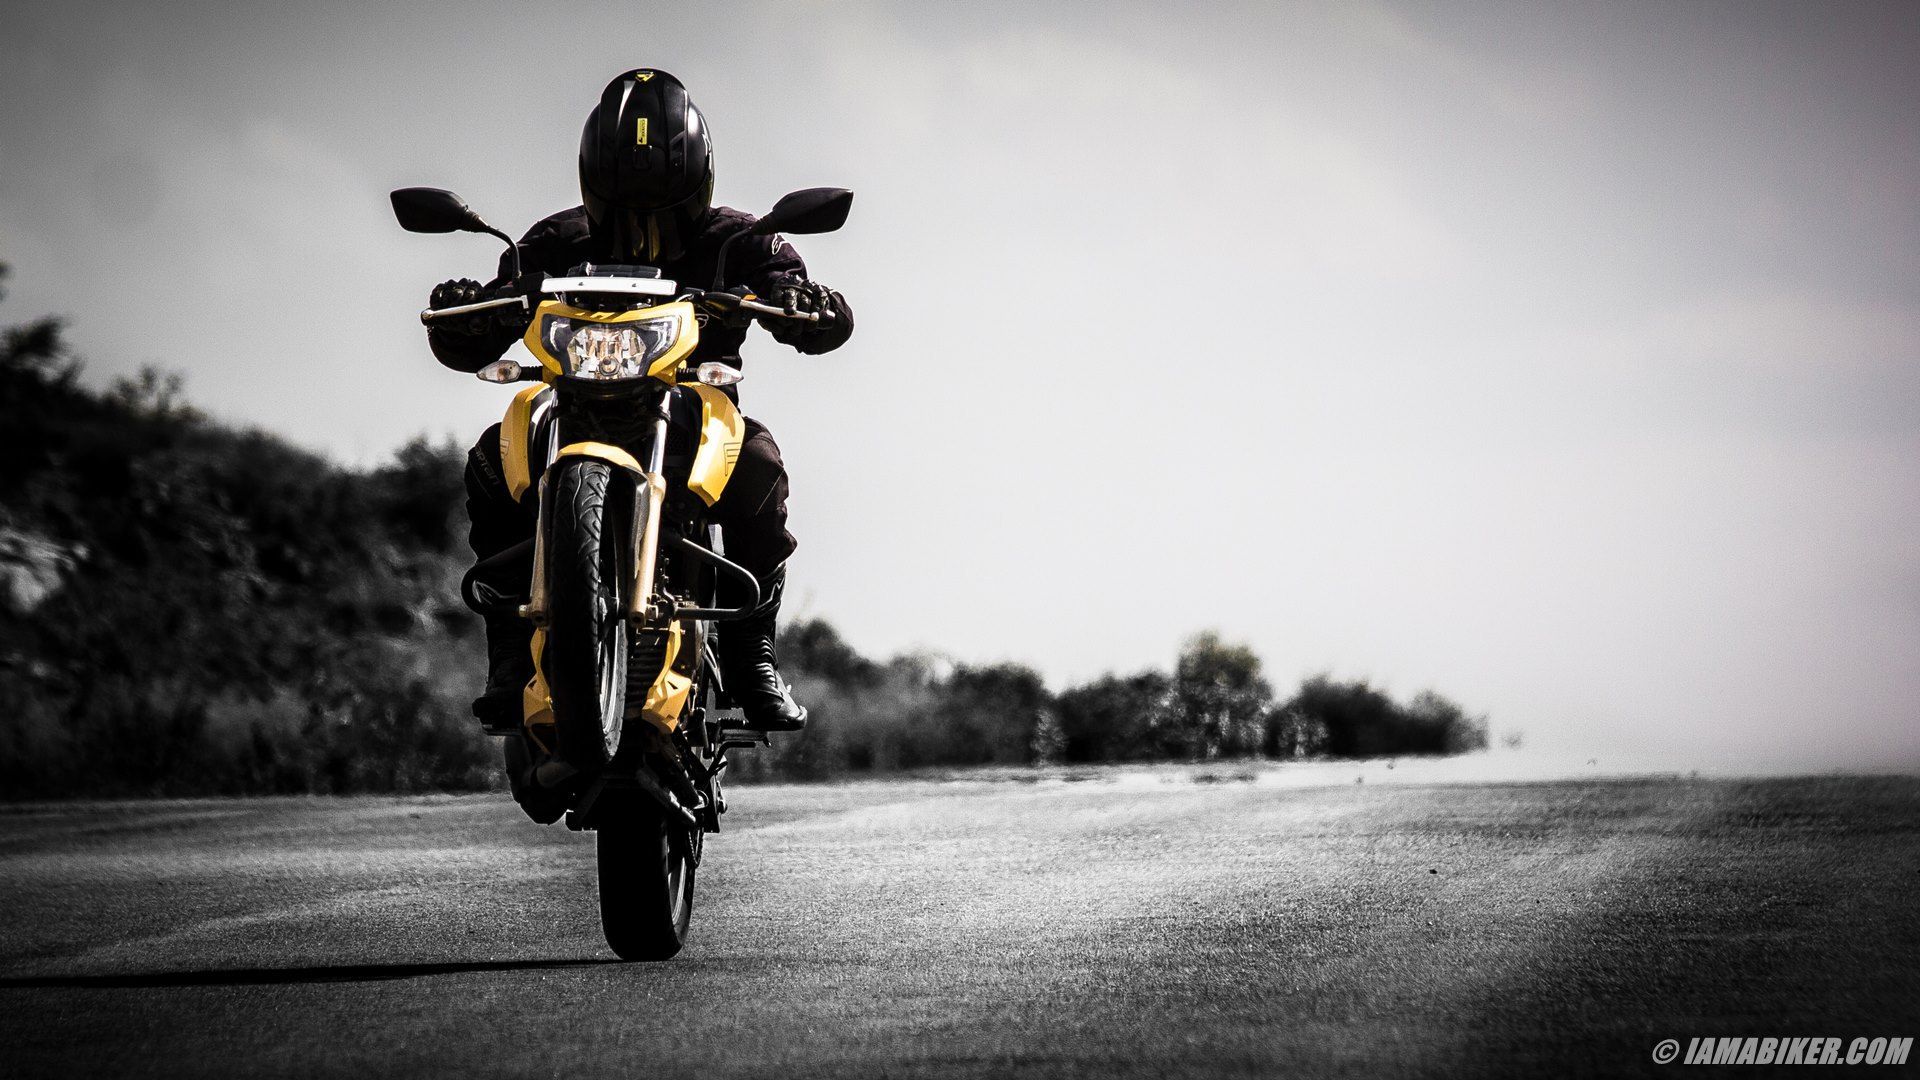 Apache Rtr 200 Hd Wallpapers Motorcycle Wallpaper, - Motorcycle , HD Wallpaper & Backgrounds